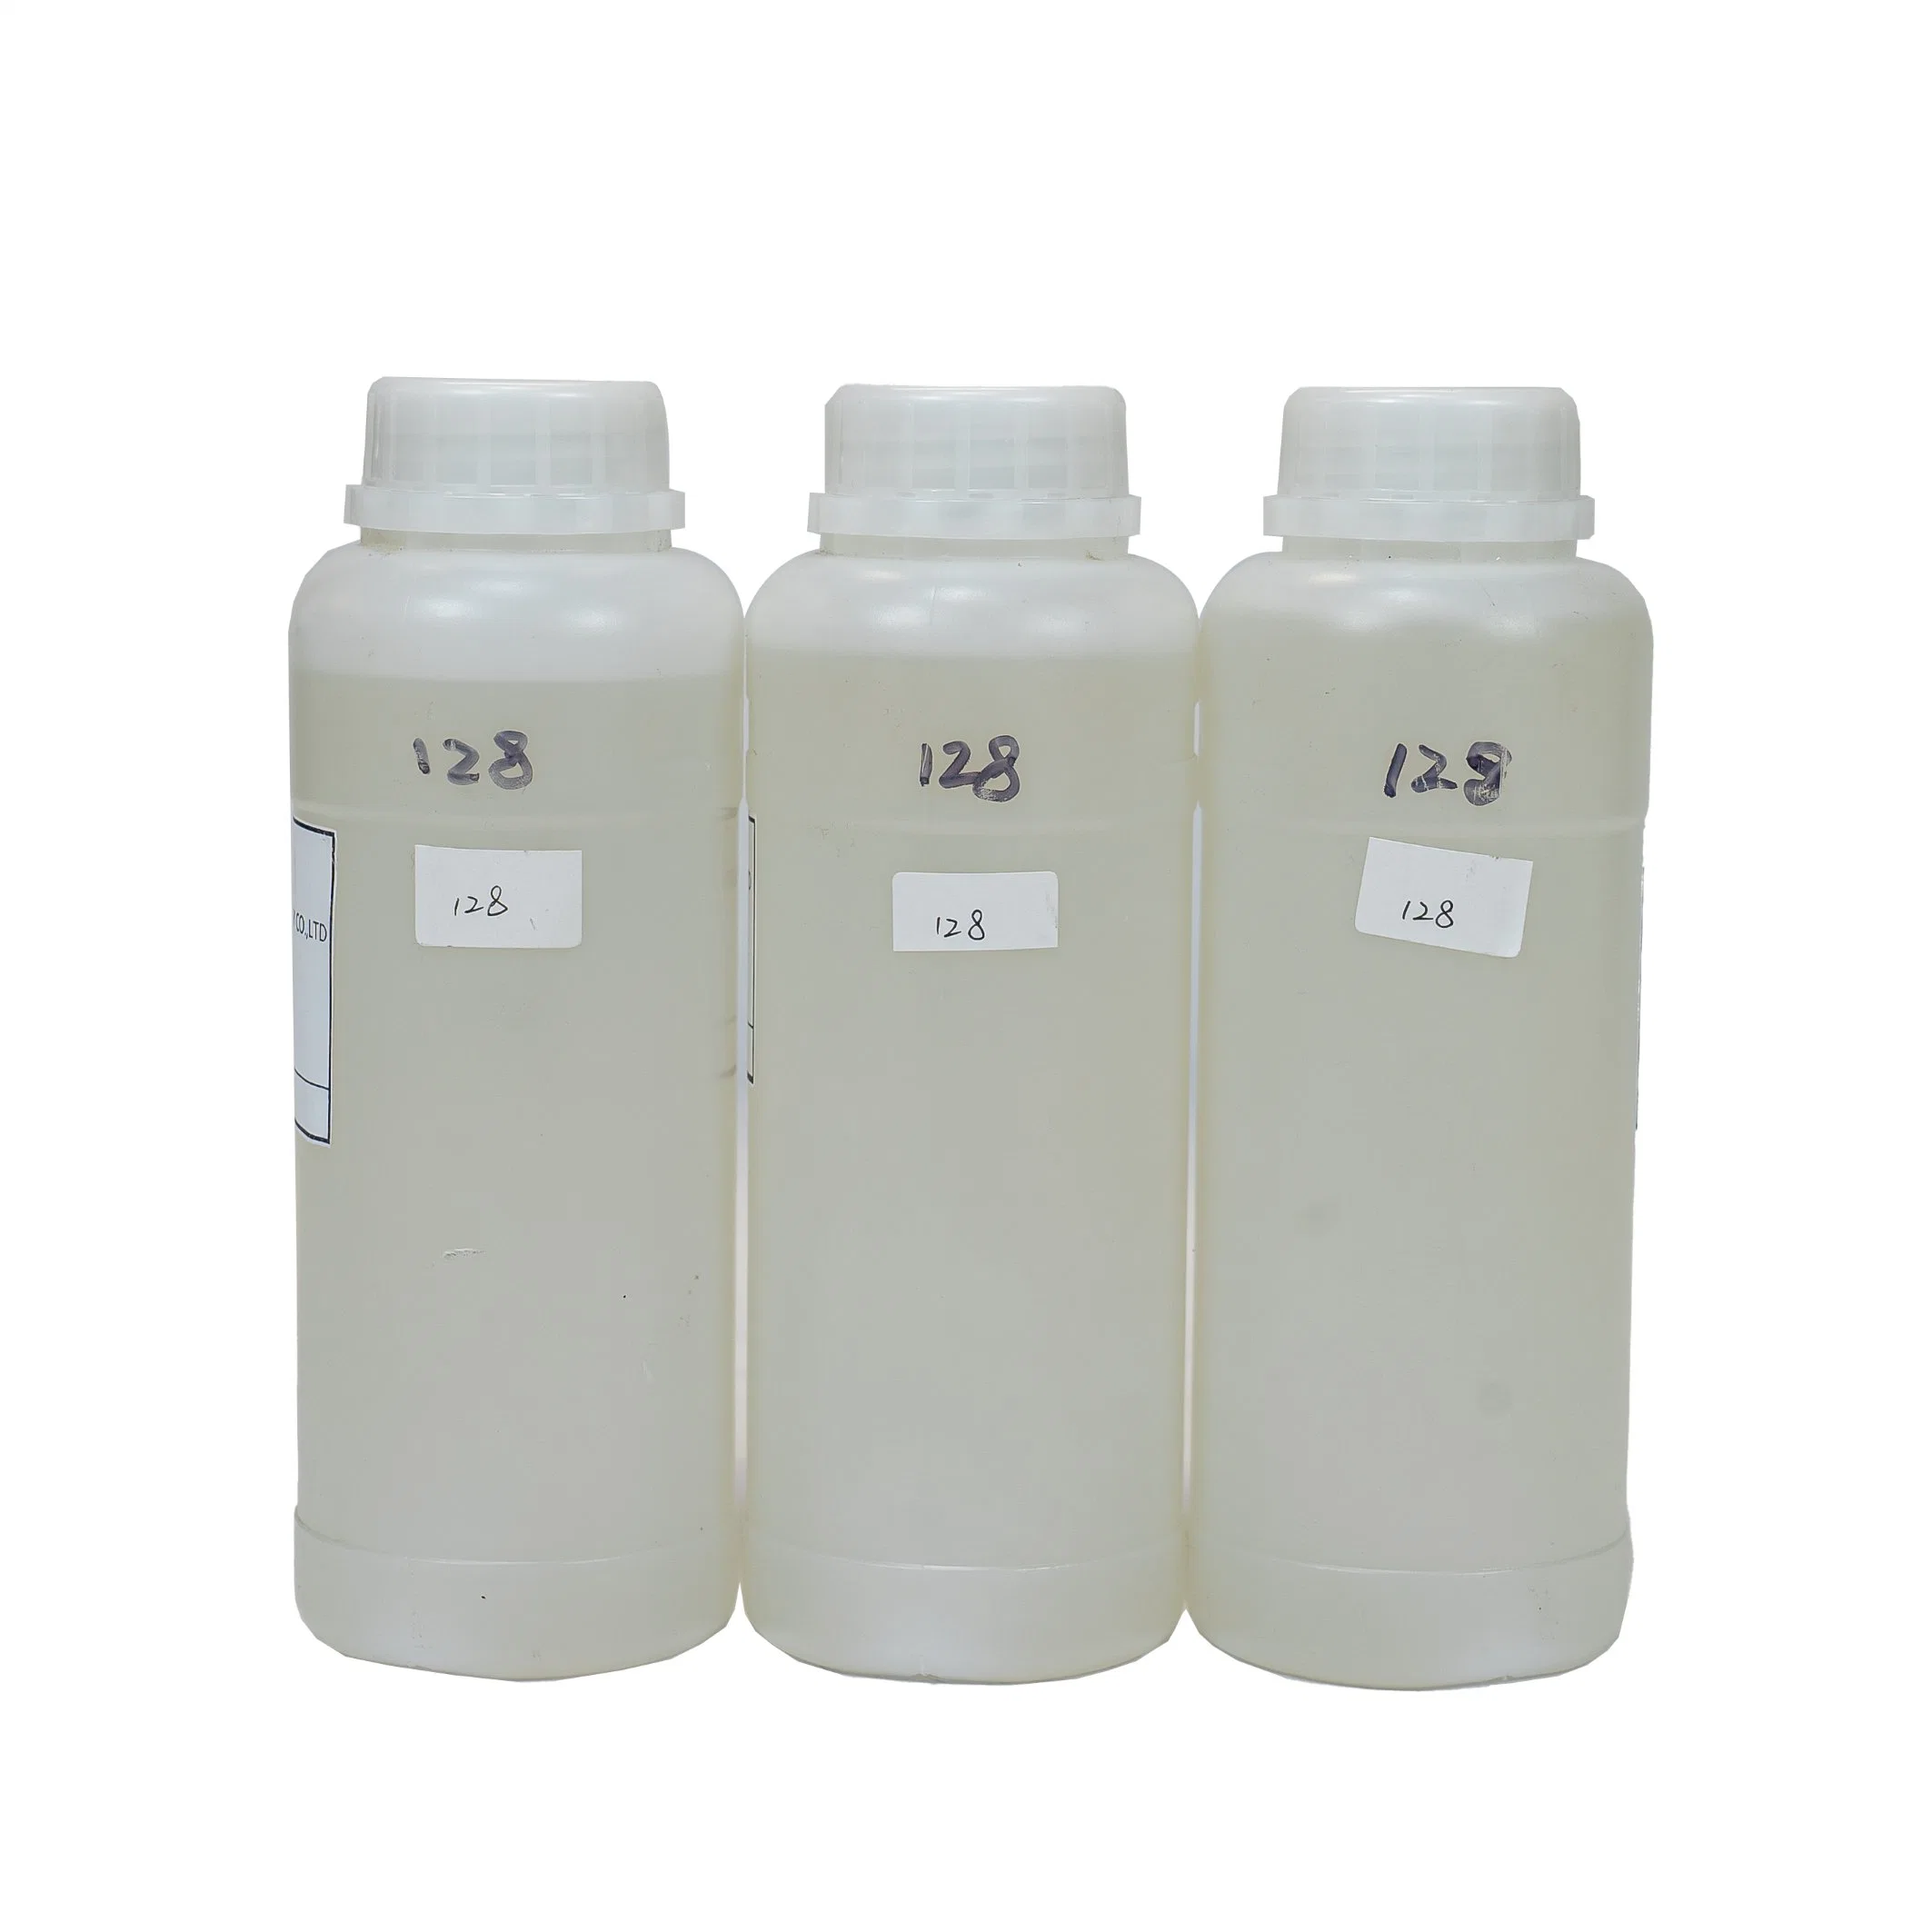 128 Bisphenol a Epoxy Resin for Coatings, Electronic Materials, Composite Materials, Adhesives, Epoxy Flooring